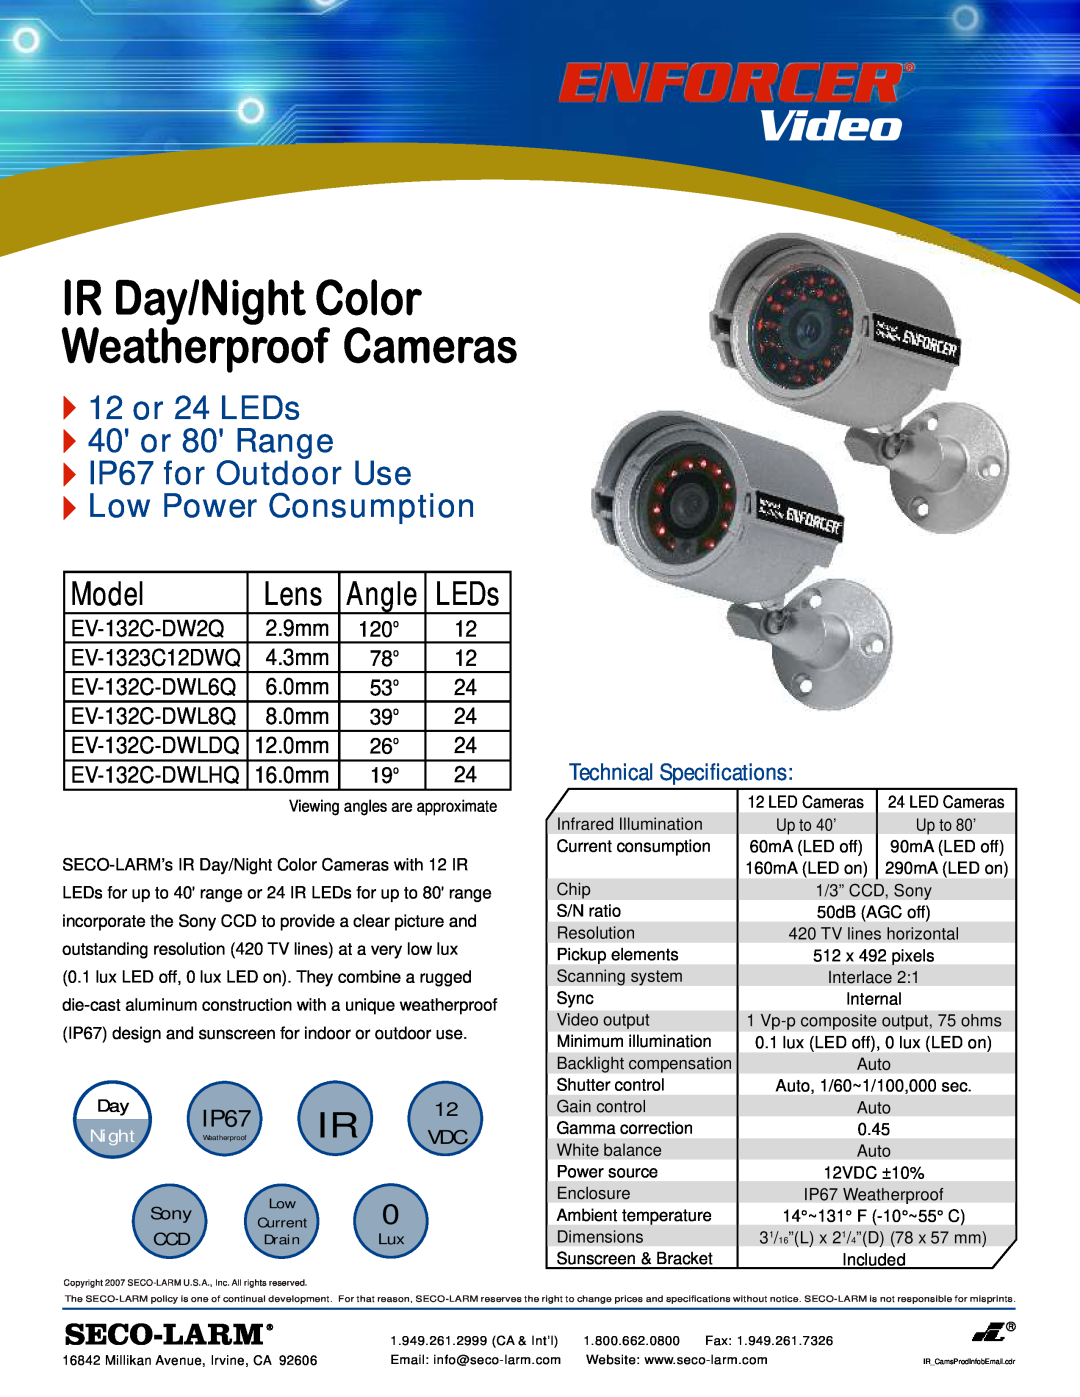 SECO-LARM USA EV-132C-DWLHQ technical specifications 12 or 24 LEDs 40 or 80 Range IP67 for Outdoor Use, Model, Lens, Angle 